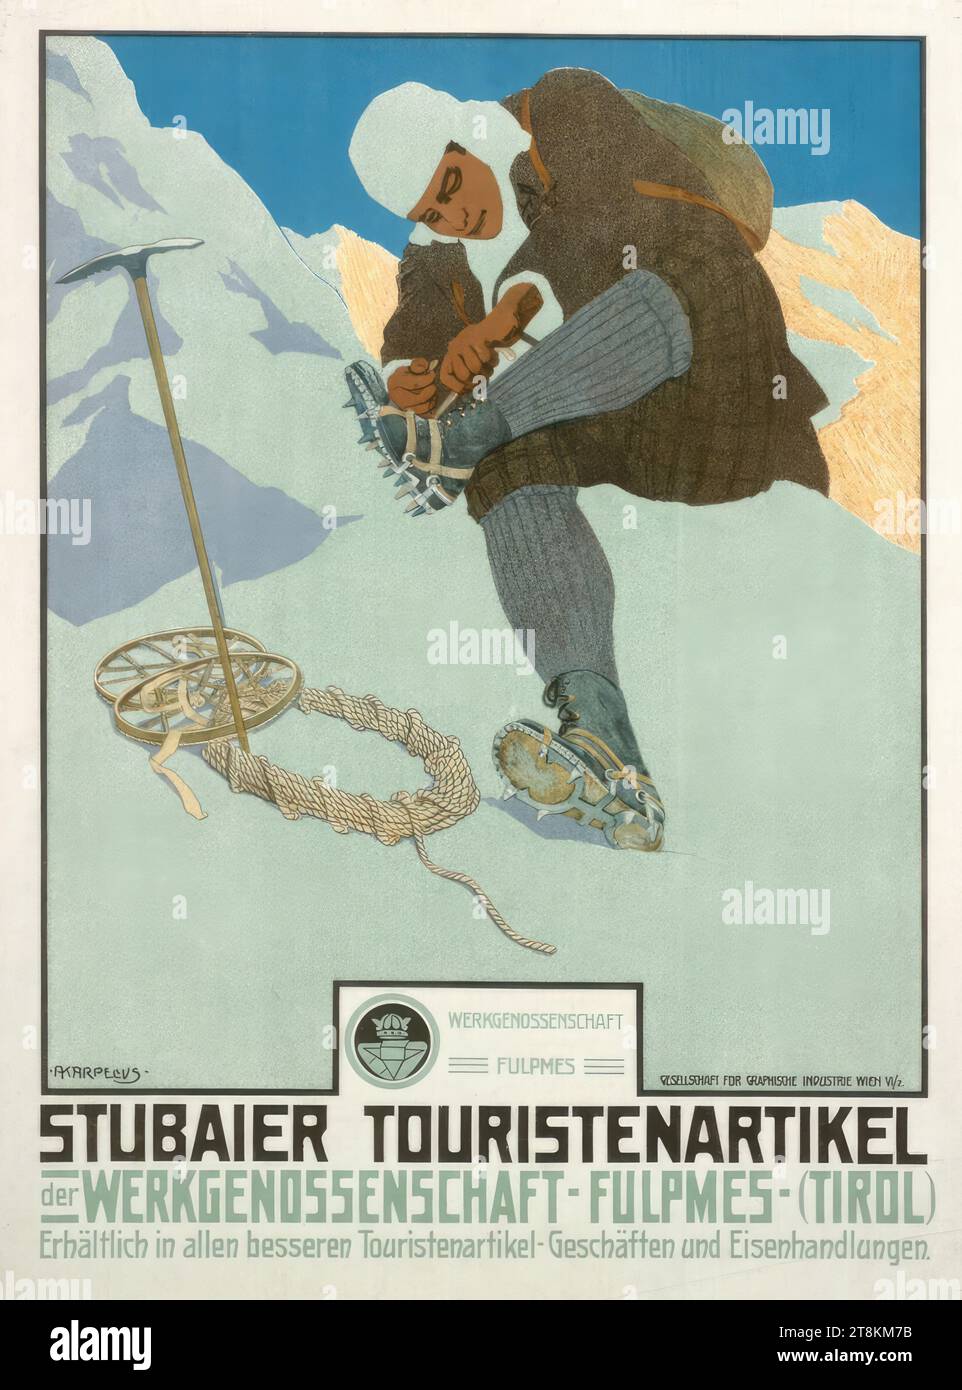 STUBAI TOURIST ARTICLES FROM THE FULPMES COOPERATIVE, TYROL, Adolf Karpellus, Austria, 1869 - 1919, around 1910, print, color lithograph, sheet: 645 mm x 485 mm Stock Photo